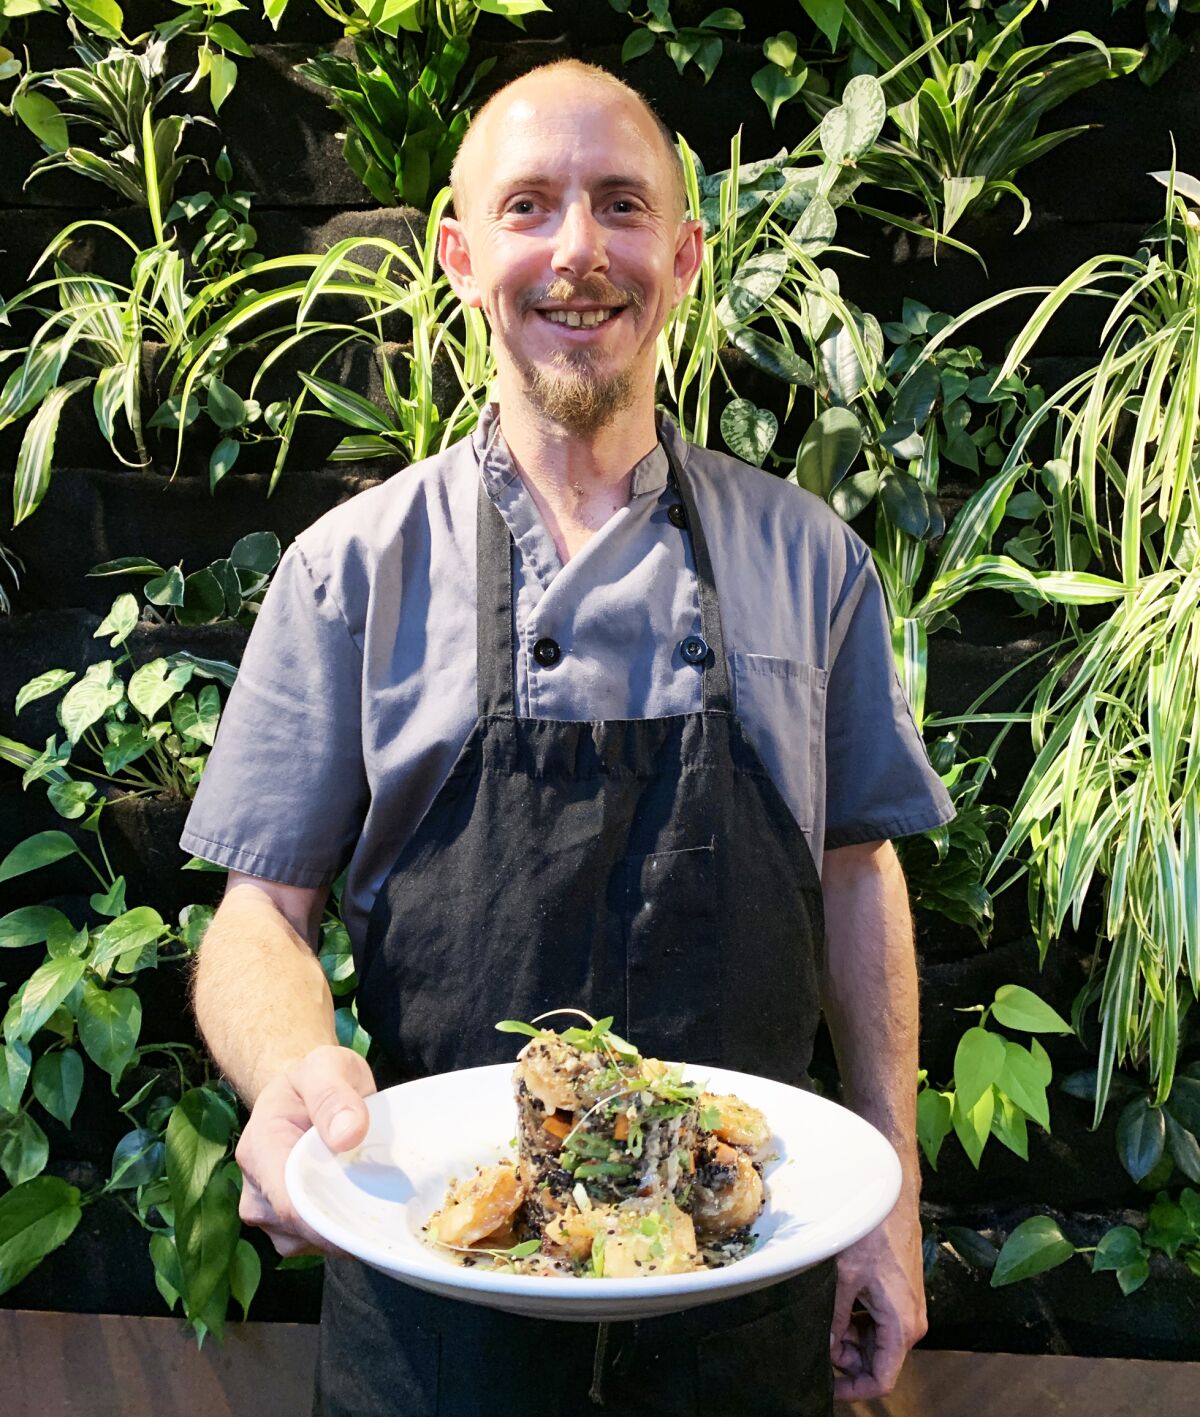 Mario Manship, the executive chef at Masters Kitchen and Cocktail in Oceanside, with one of the dishes on his new menu rolling out Nov. 1: honey pecan shrimp with forbidden black rice and fried pork belly bites.